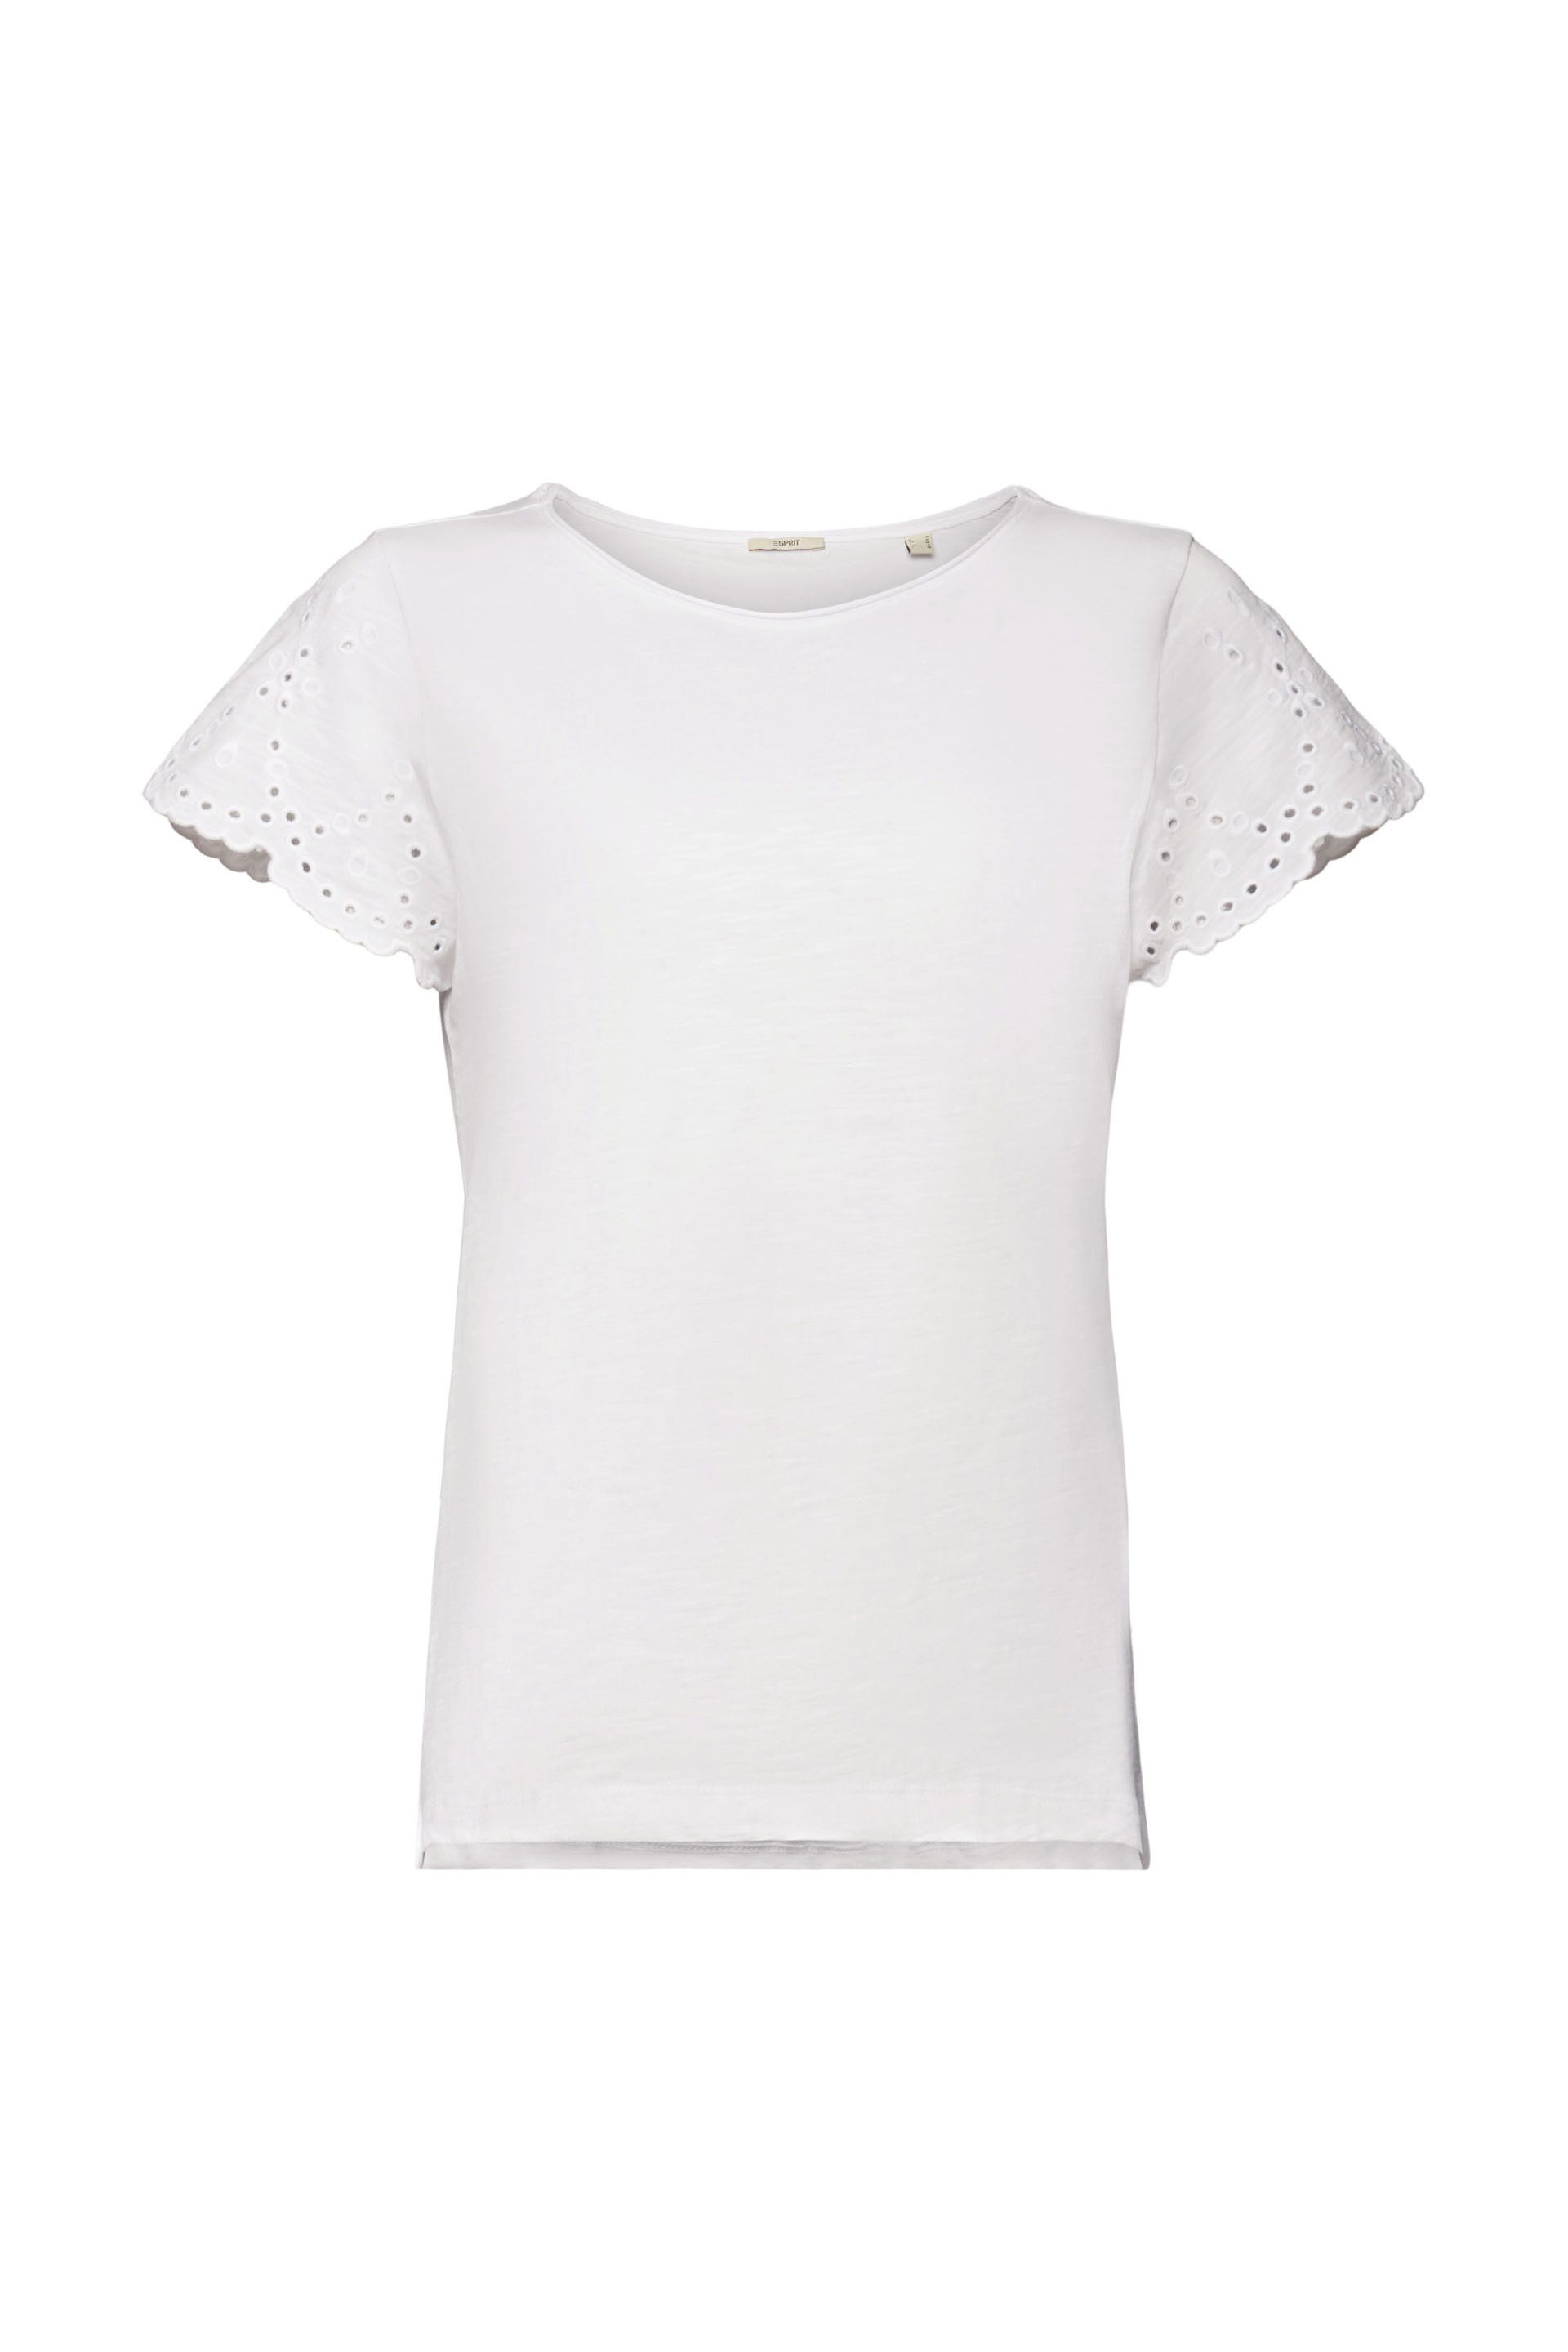 Esprit - Cotton T-shirt with embroidery, White, large image number 0